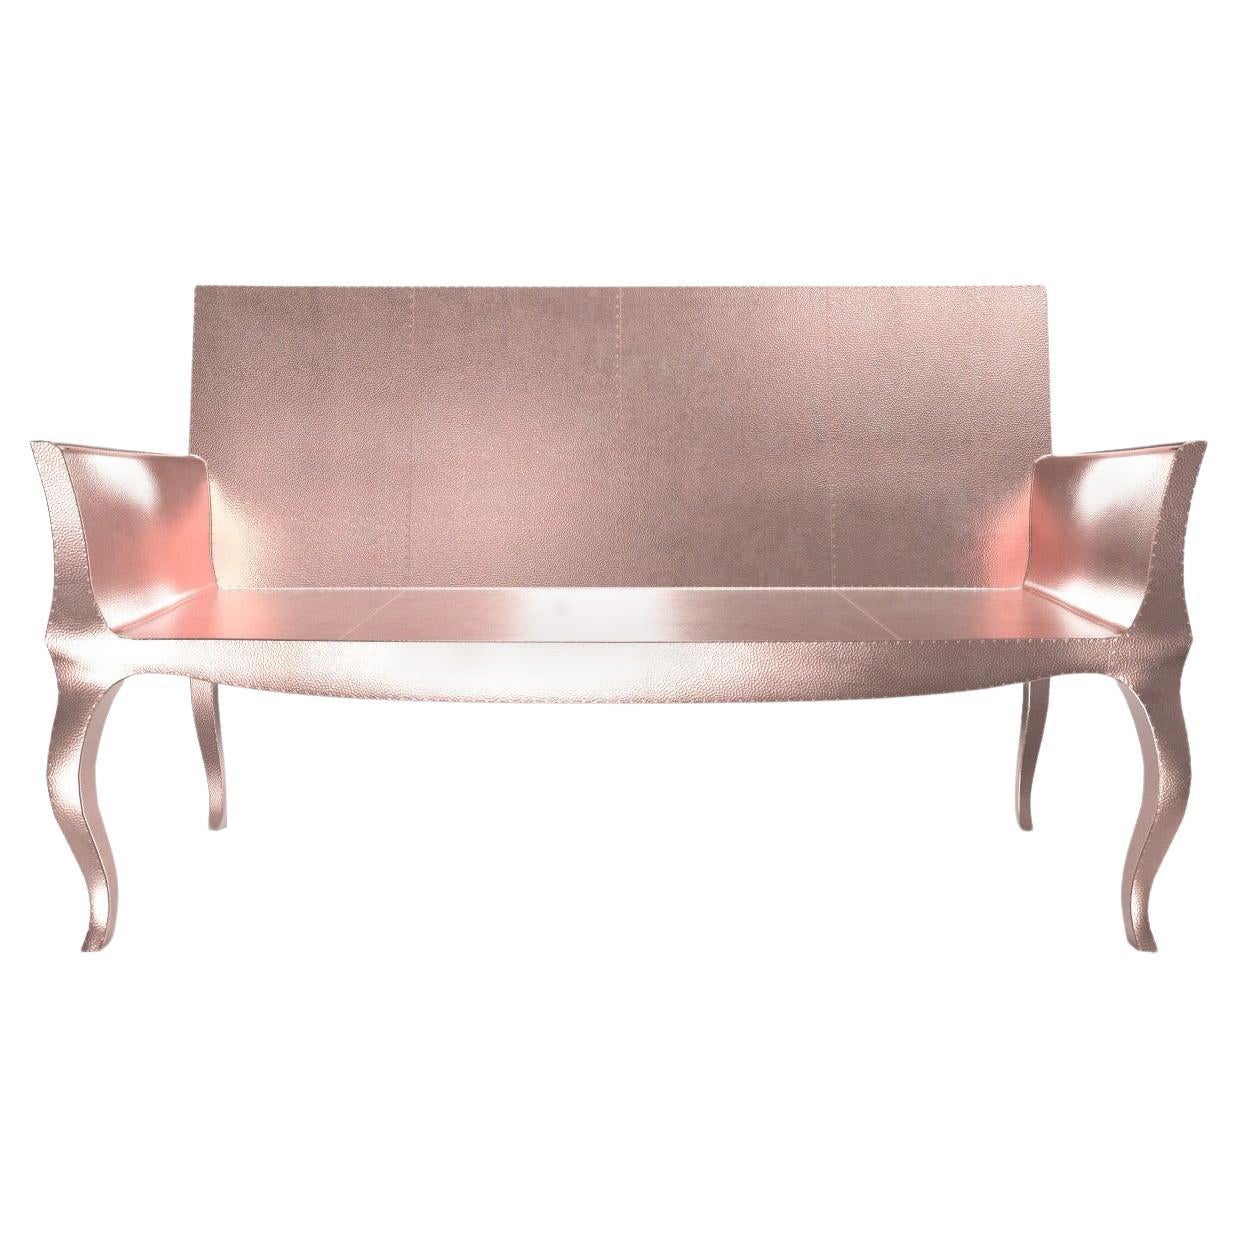 Louise Settee Art Deco Canapes in Mid. Hammered Copper by Paul Mathieu For Sale